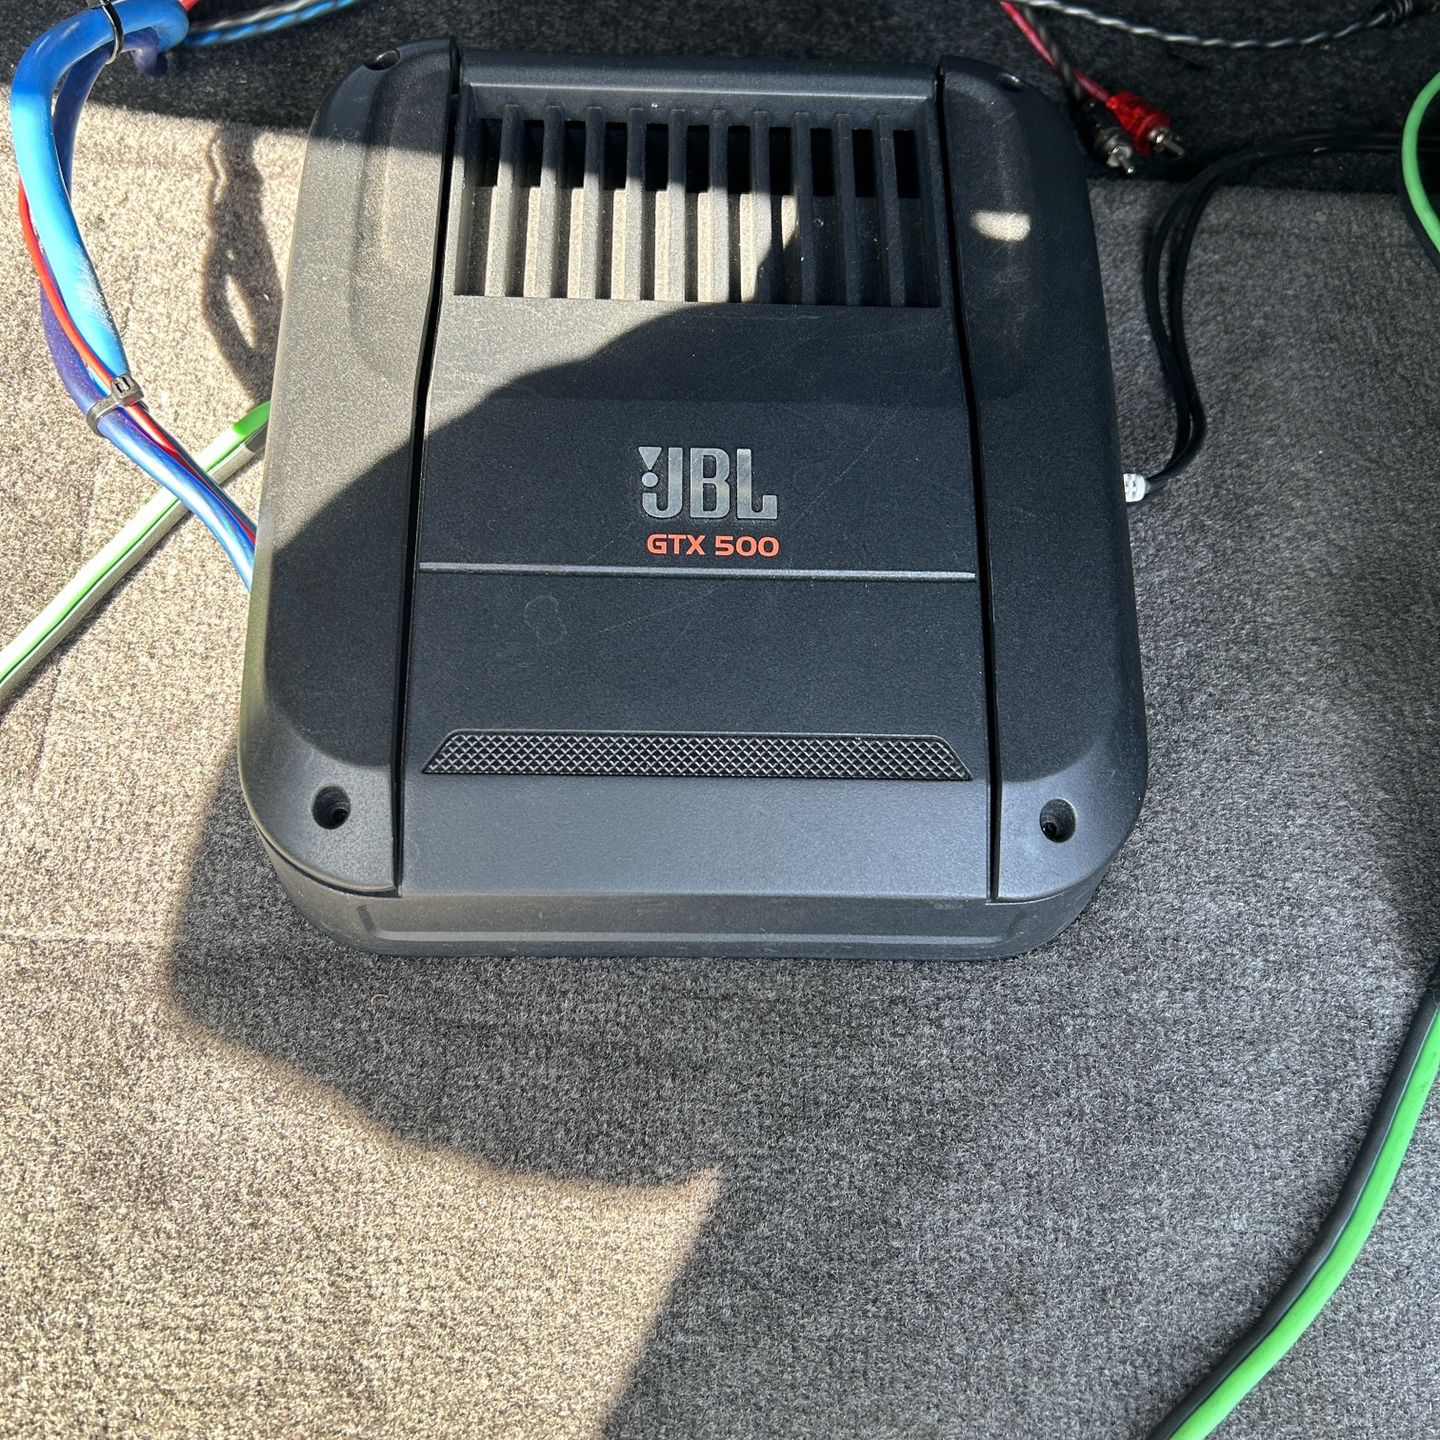 masser Mob Ved daggry Jbl Gtx500 770w 2ohm Can Also Be Used 1ohm ( BEAST LITTLE AMPLIFIER COME  TEST VOLUME) for Sale in Rialto, CA - OfferUp